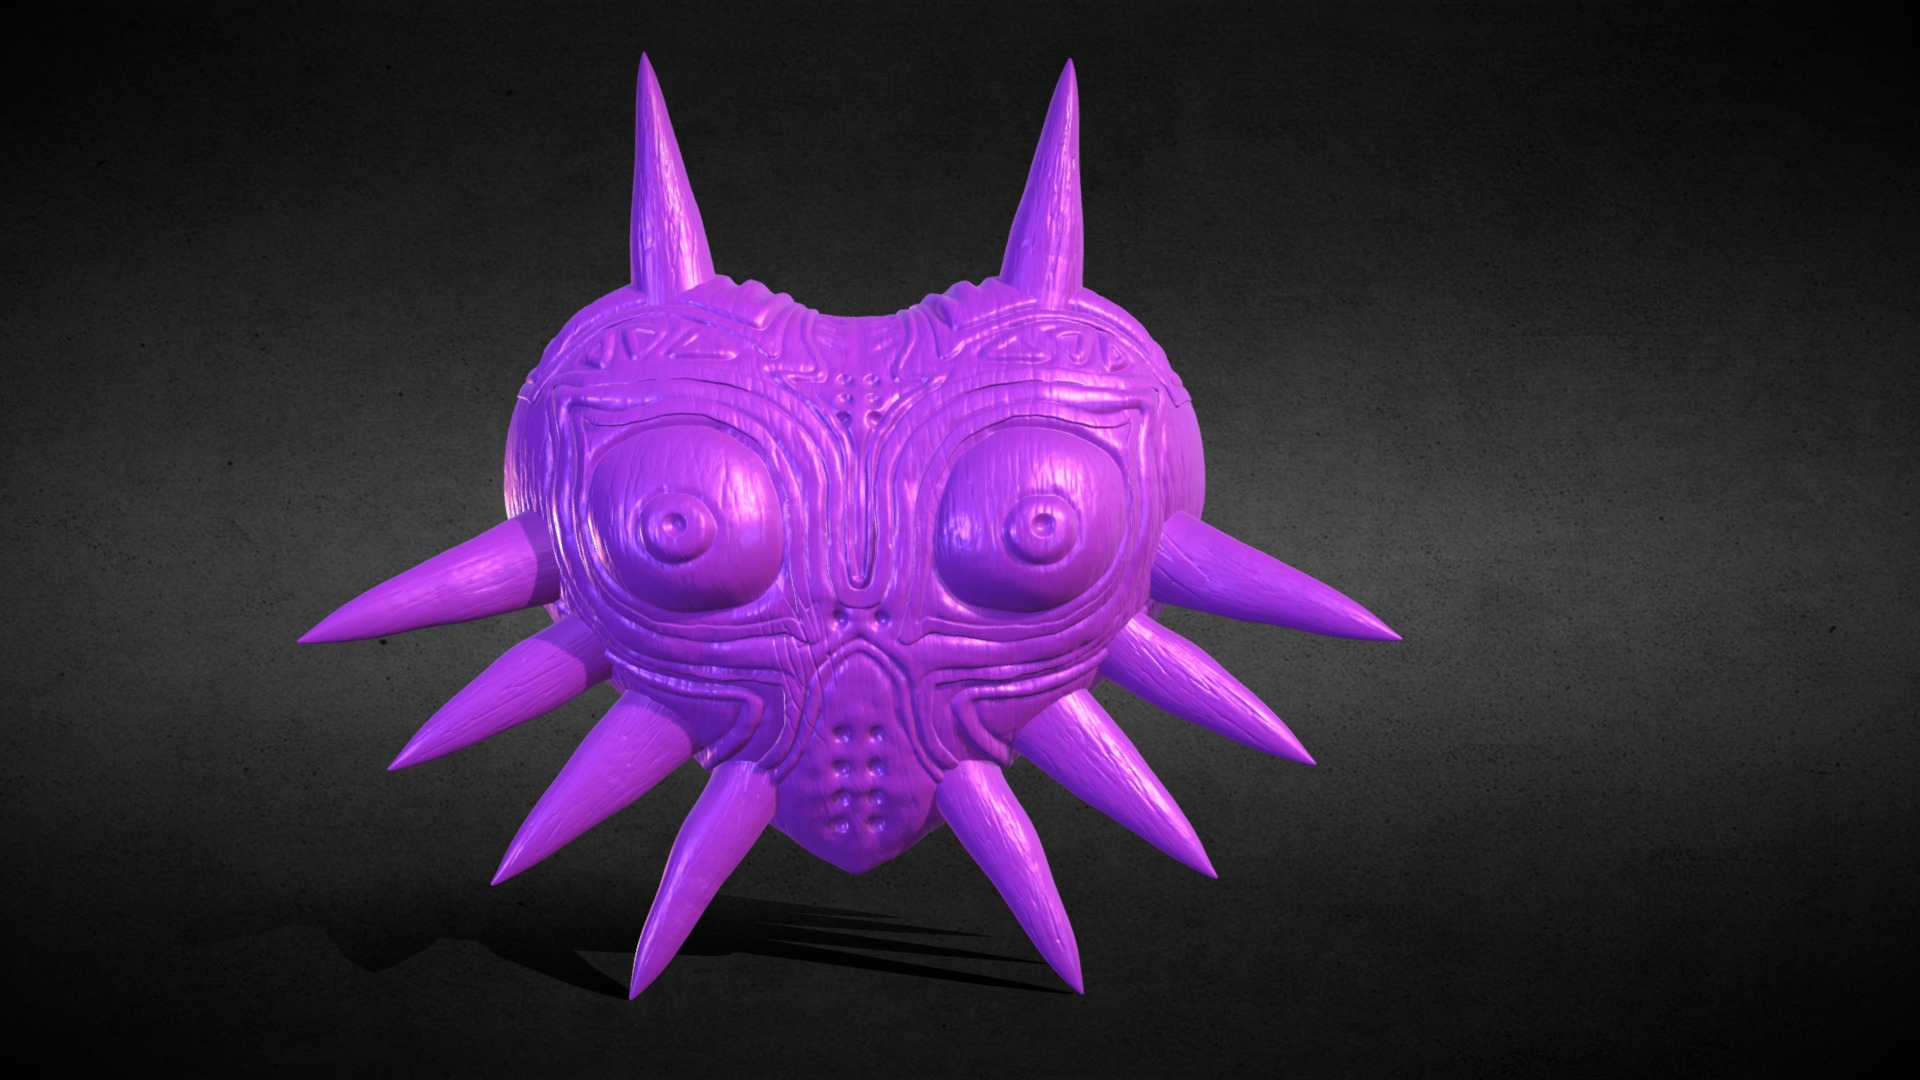 3D model Majoras Mask 3D Print - This is a 3D model of the Majoras Mask 3D Print. The 3D model is about a purple and pink toy.